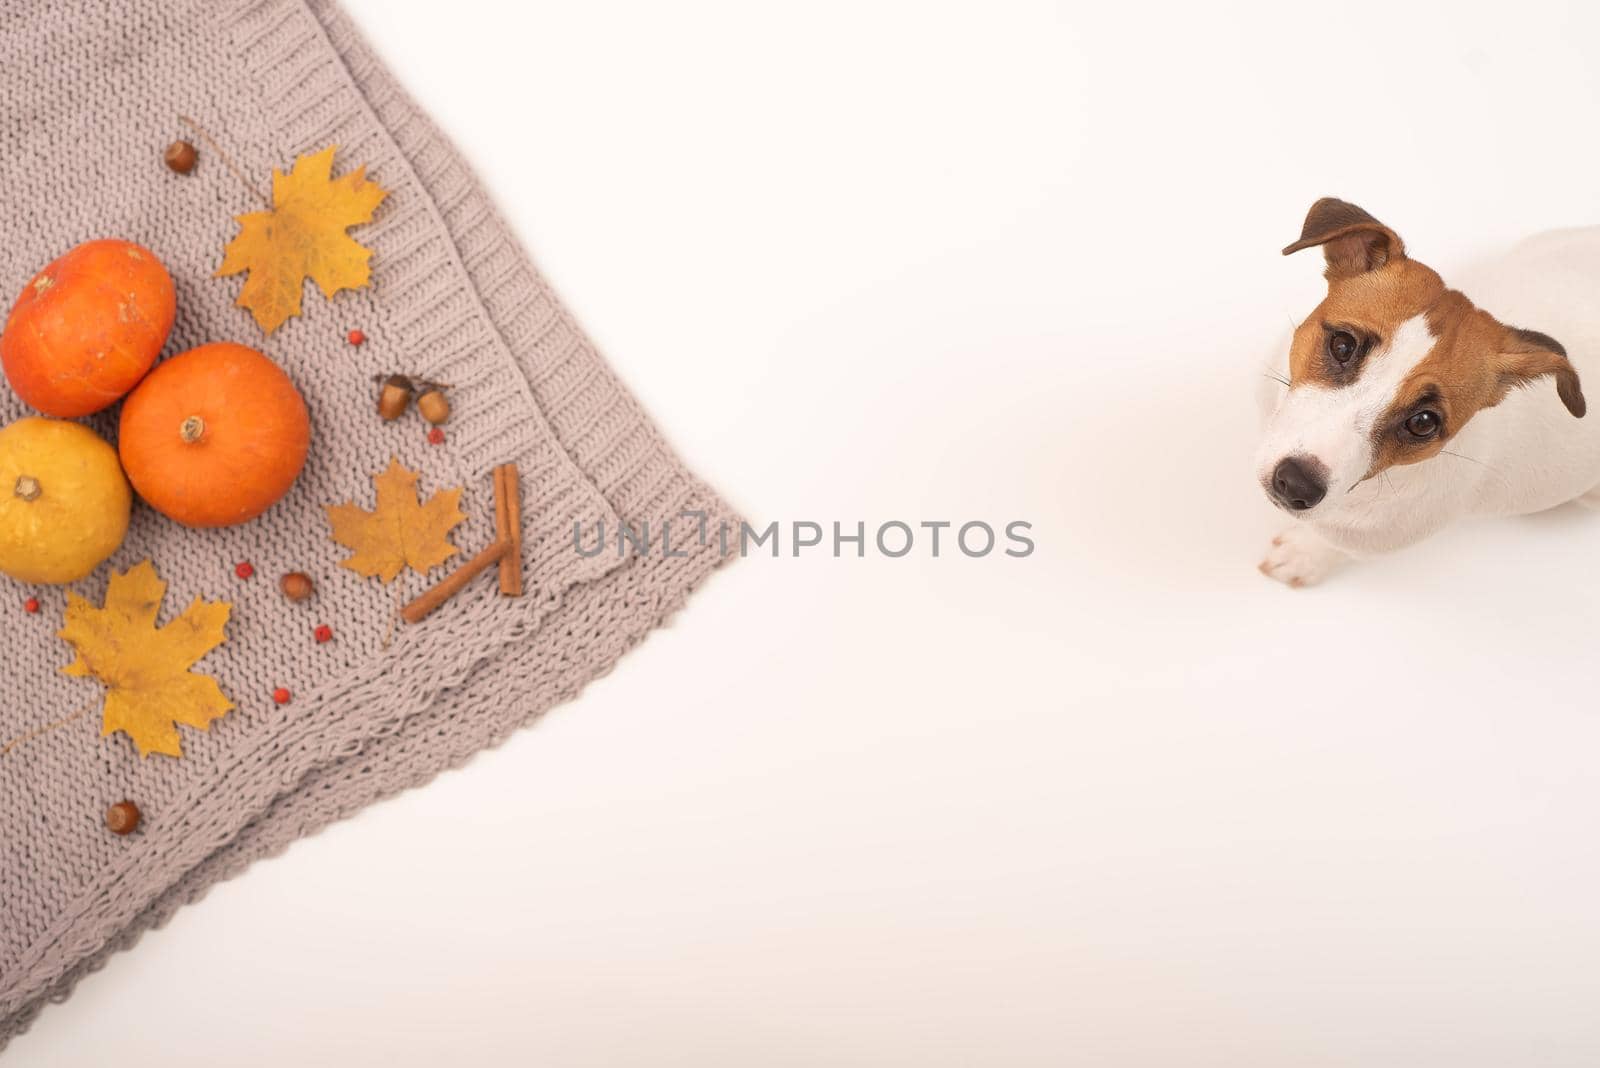 The dog lies next to the autumn flat lay. Pumpkins and maple leaves viburnum and cinnamon and acorns on a gray plaid on a white background.